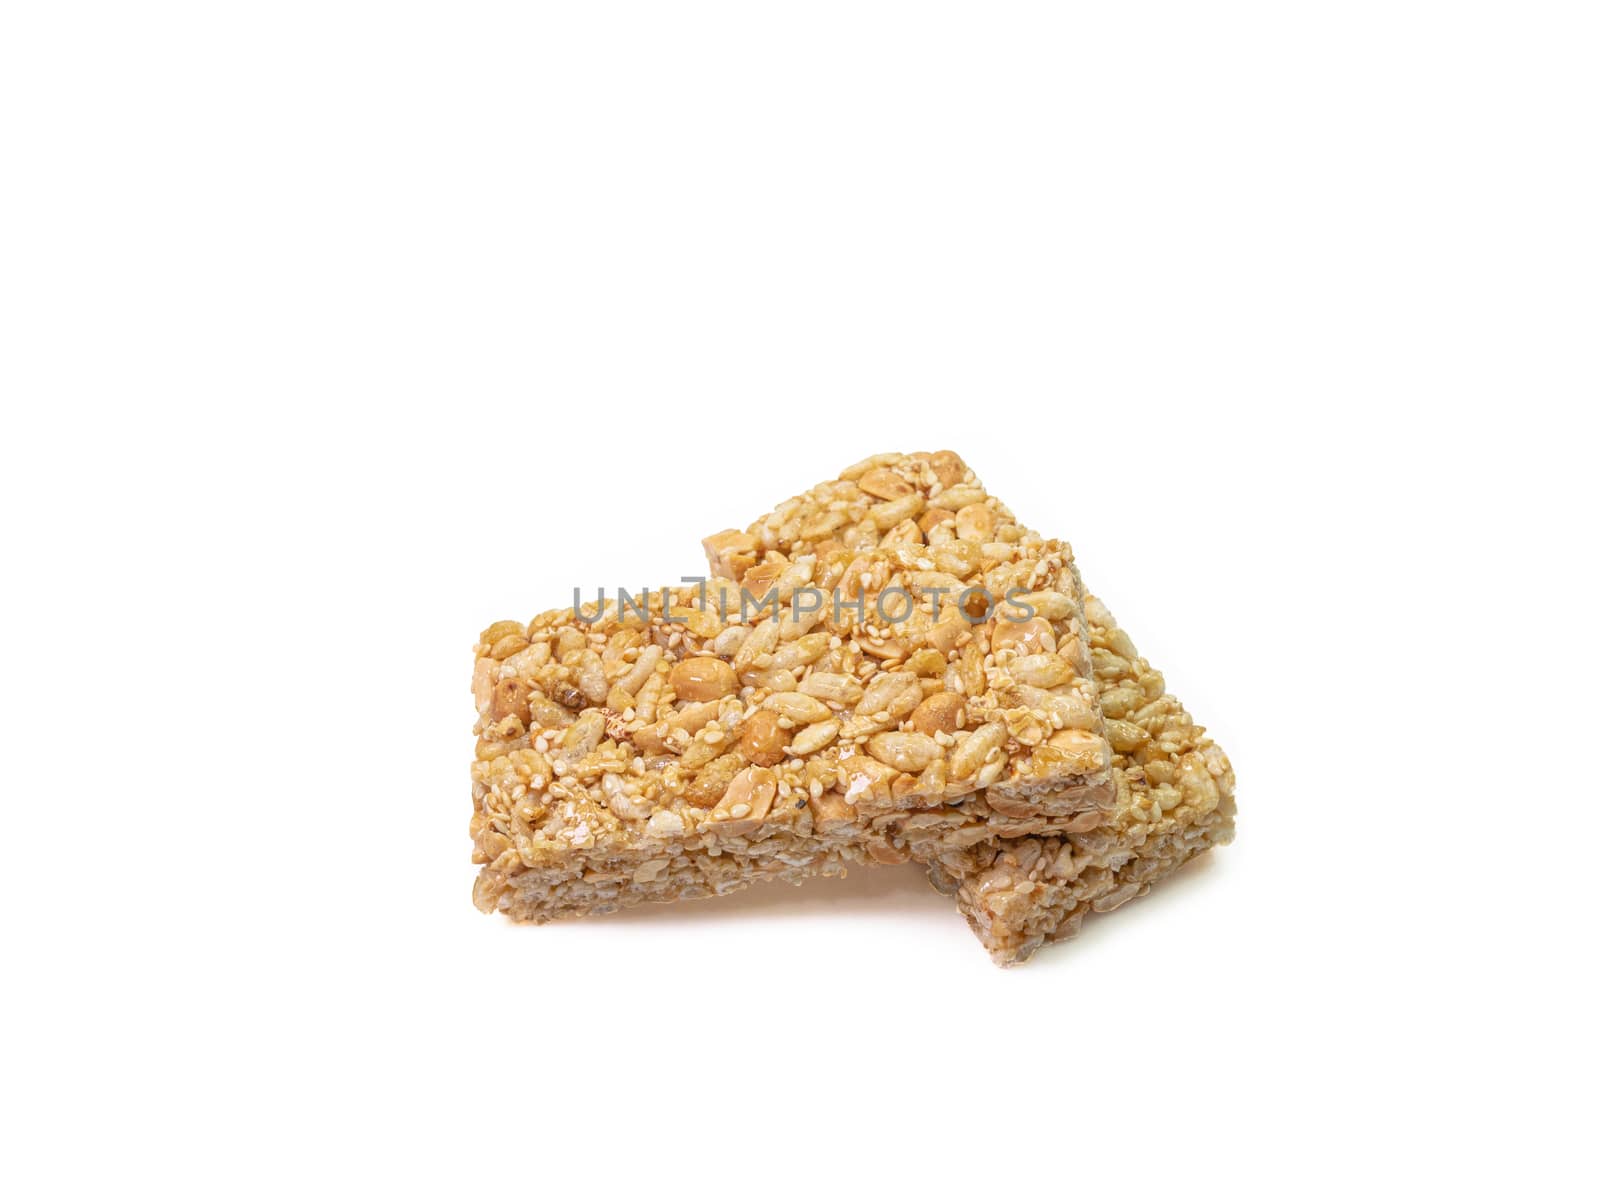 The close up of homemade Thai sweet cereal bar candy on white background, traditional muesli food in thailand.